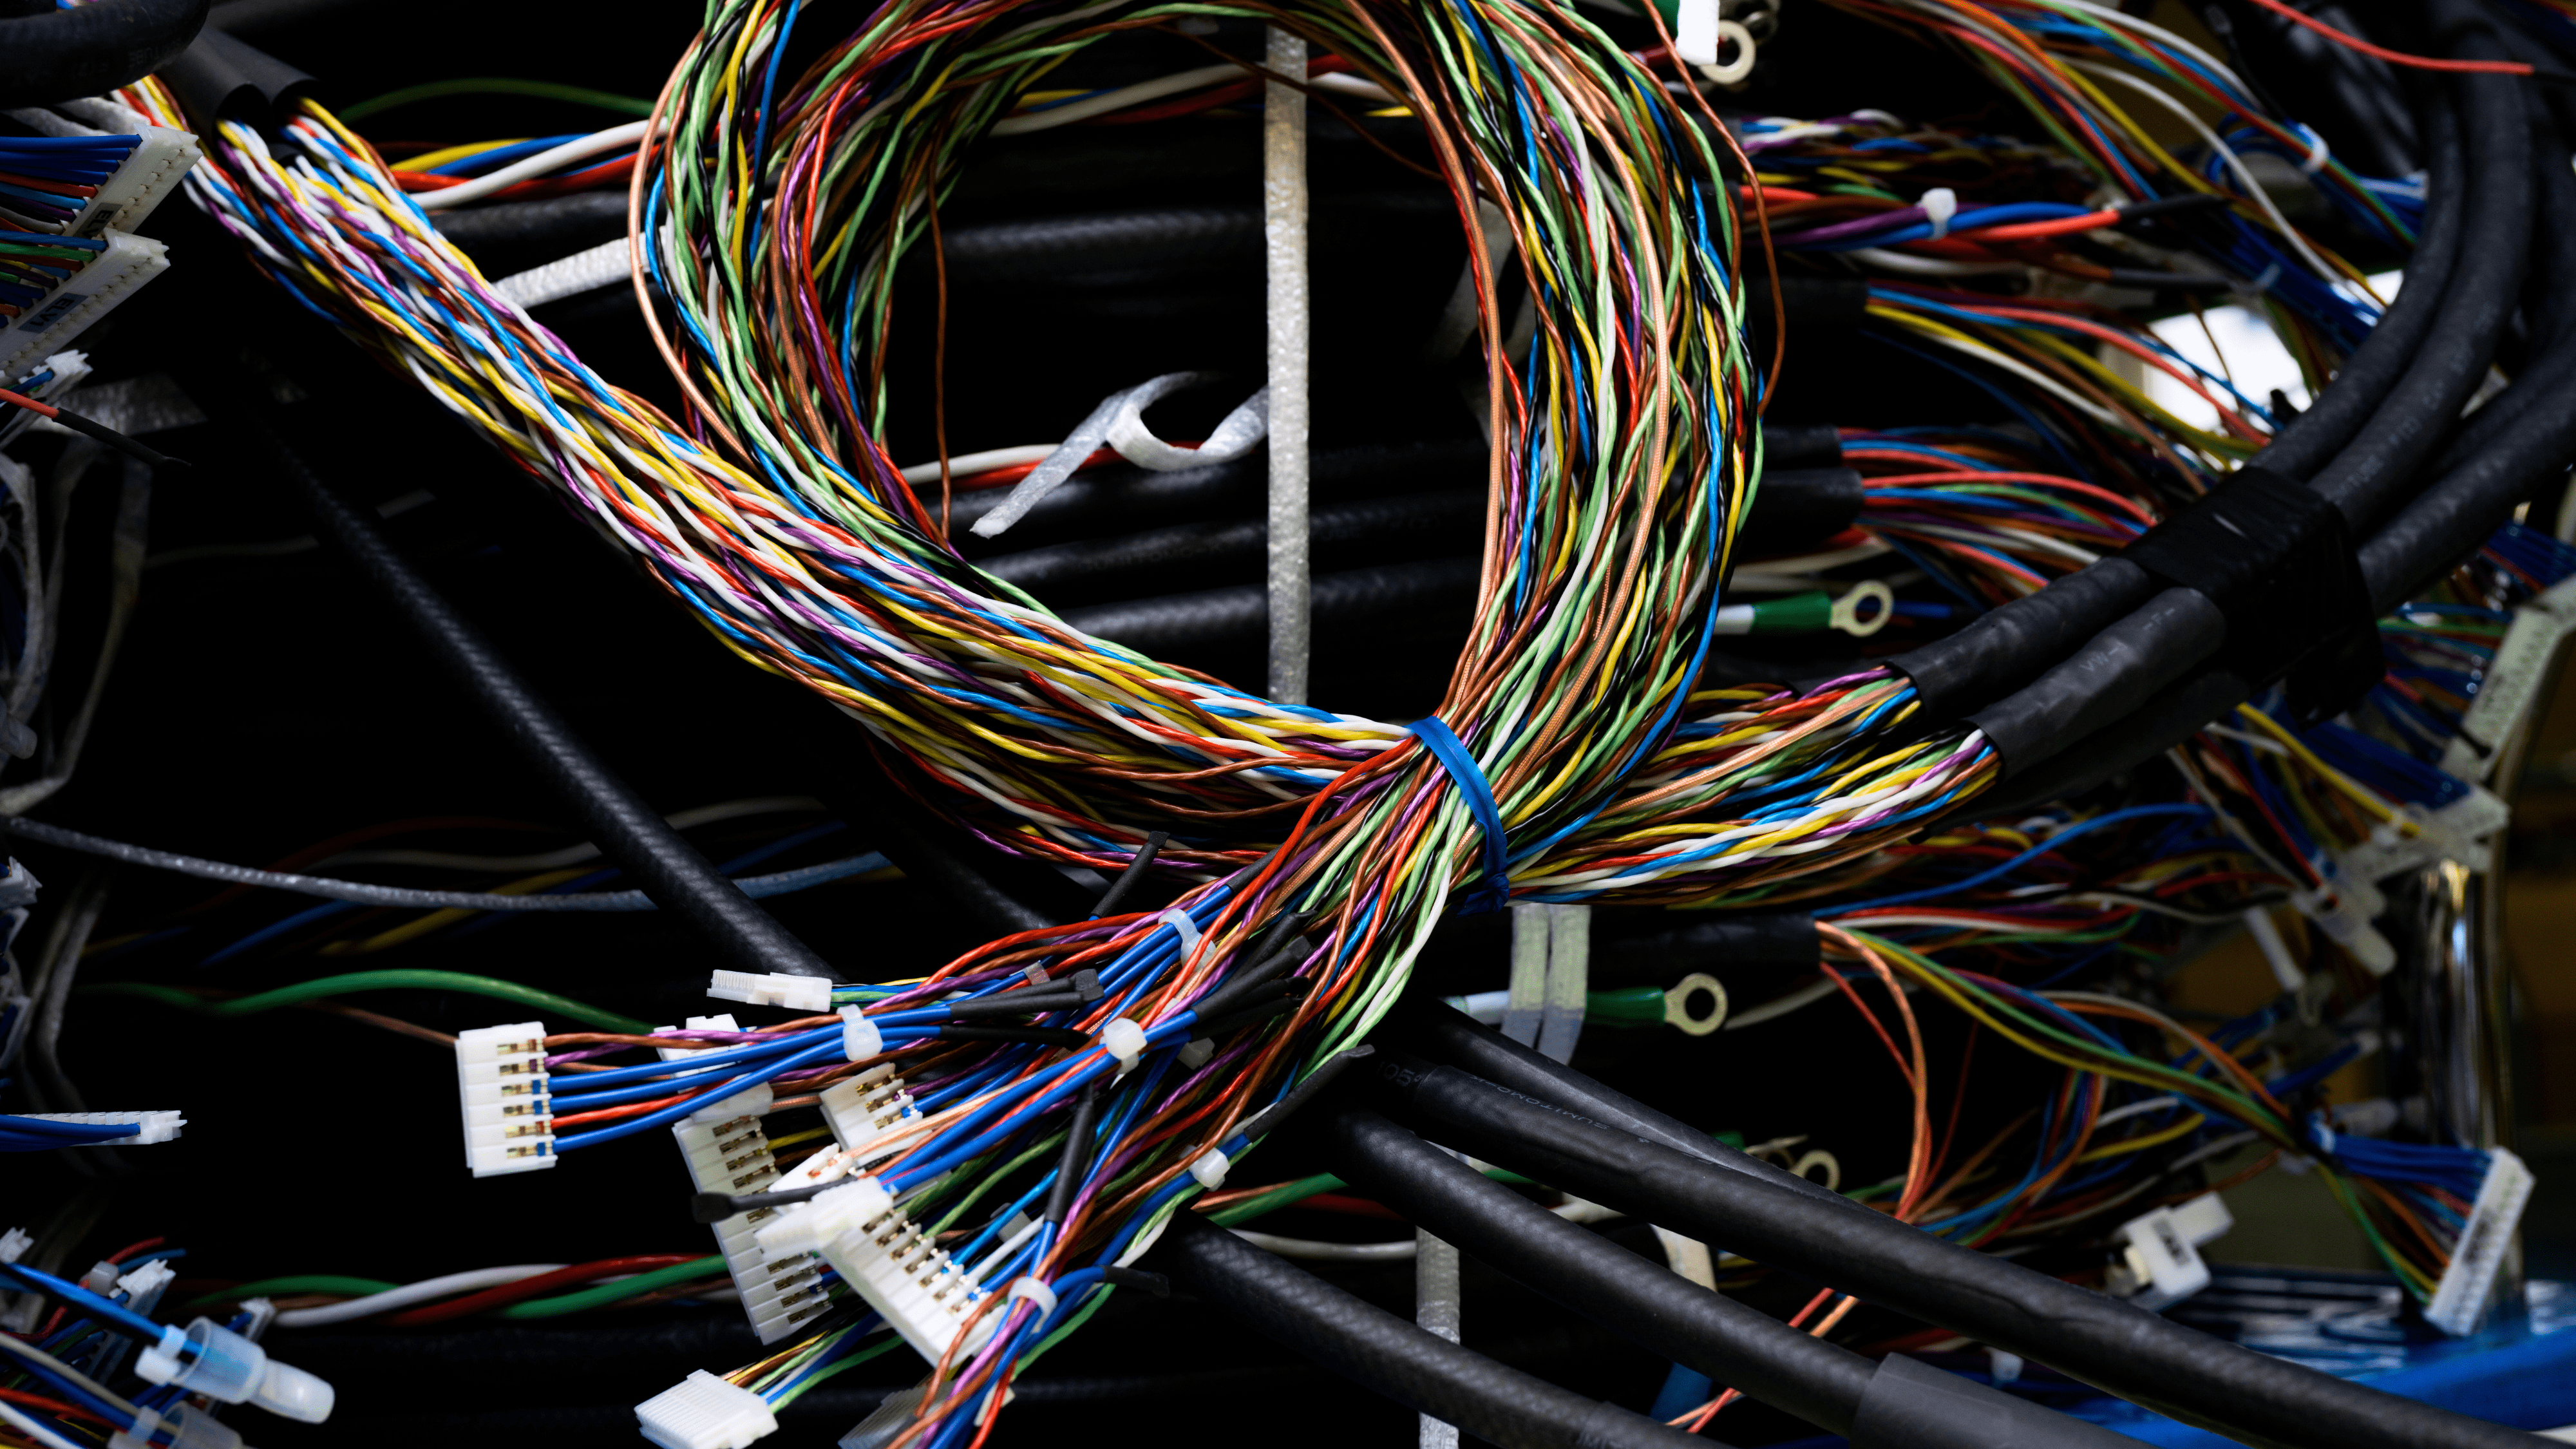 A bundle of electrical wires well organised due to the engineer using electrical computer-aided design to make the task easier.